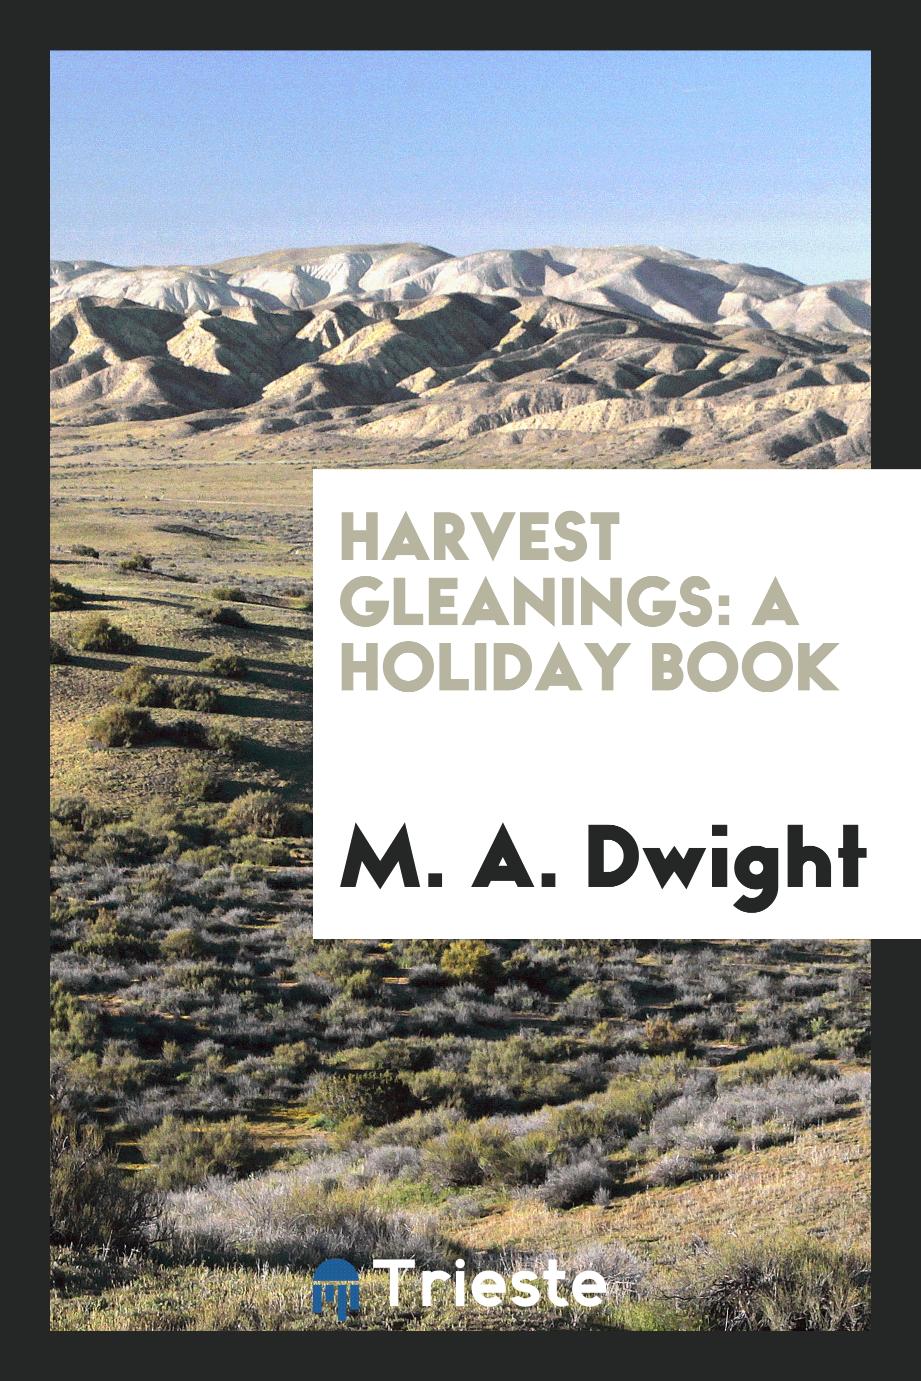 M. A. Dwight - Harvest Gleanings: A Holiday Book